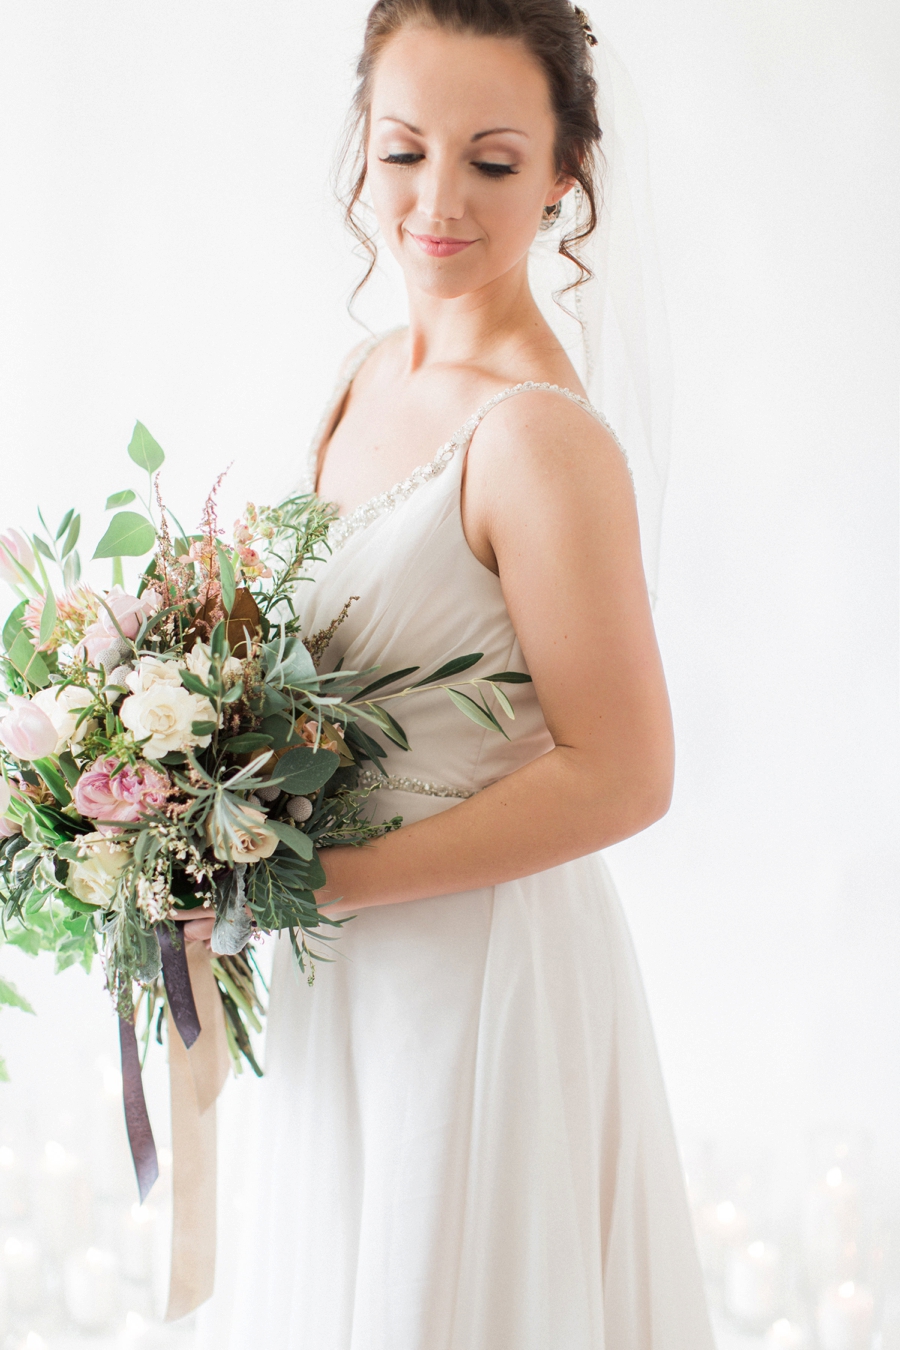 Romantic Valentine's Day Inspired Bridals | Every Last Detail